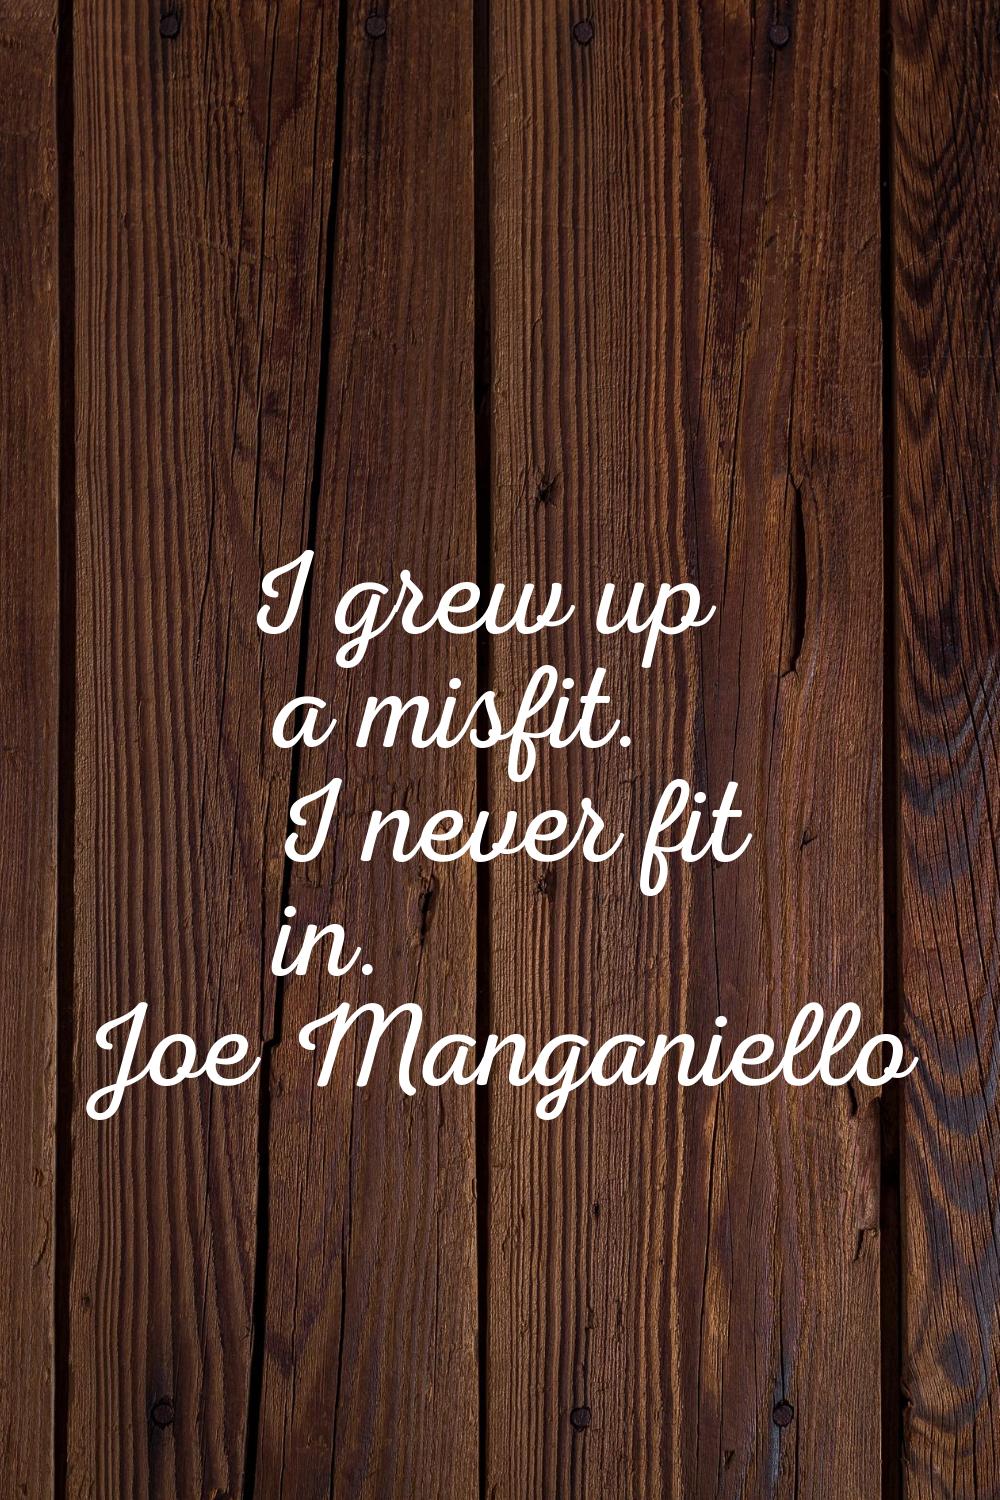 I grew up a misfit. I never fit in.